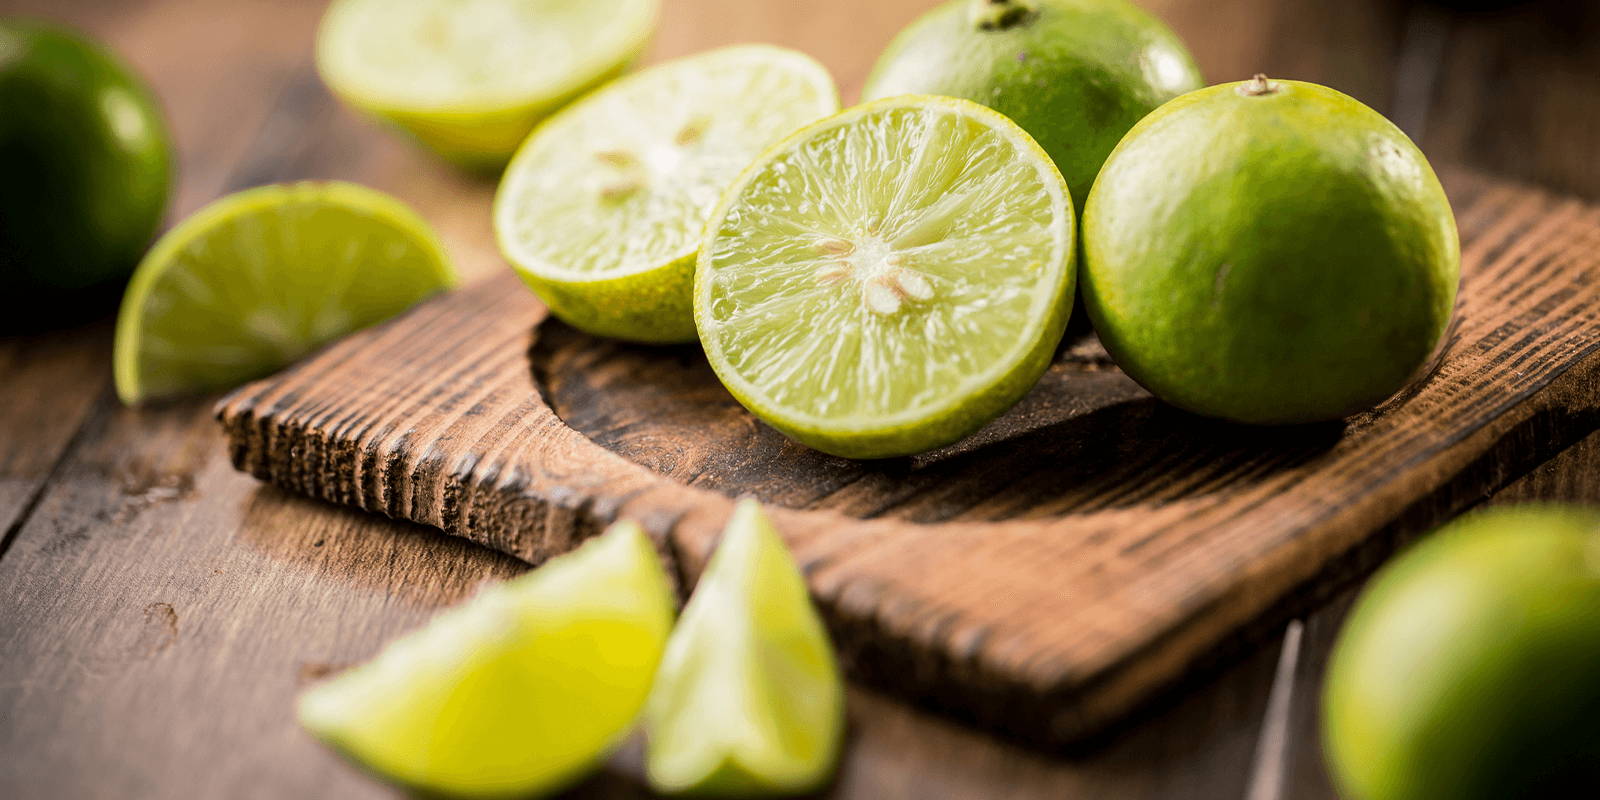 Halved, quartered, and whole limes, placed on a wooden board.